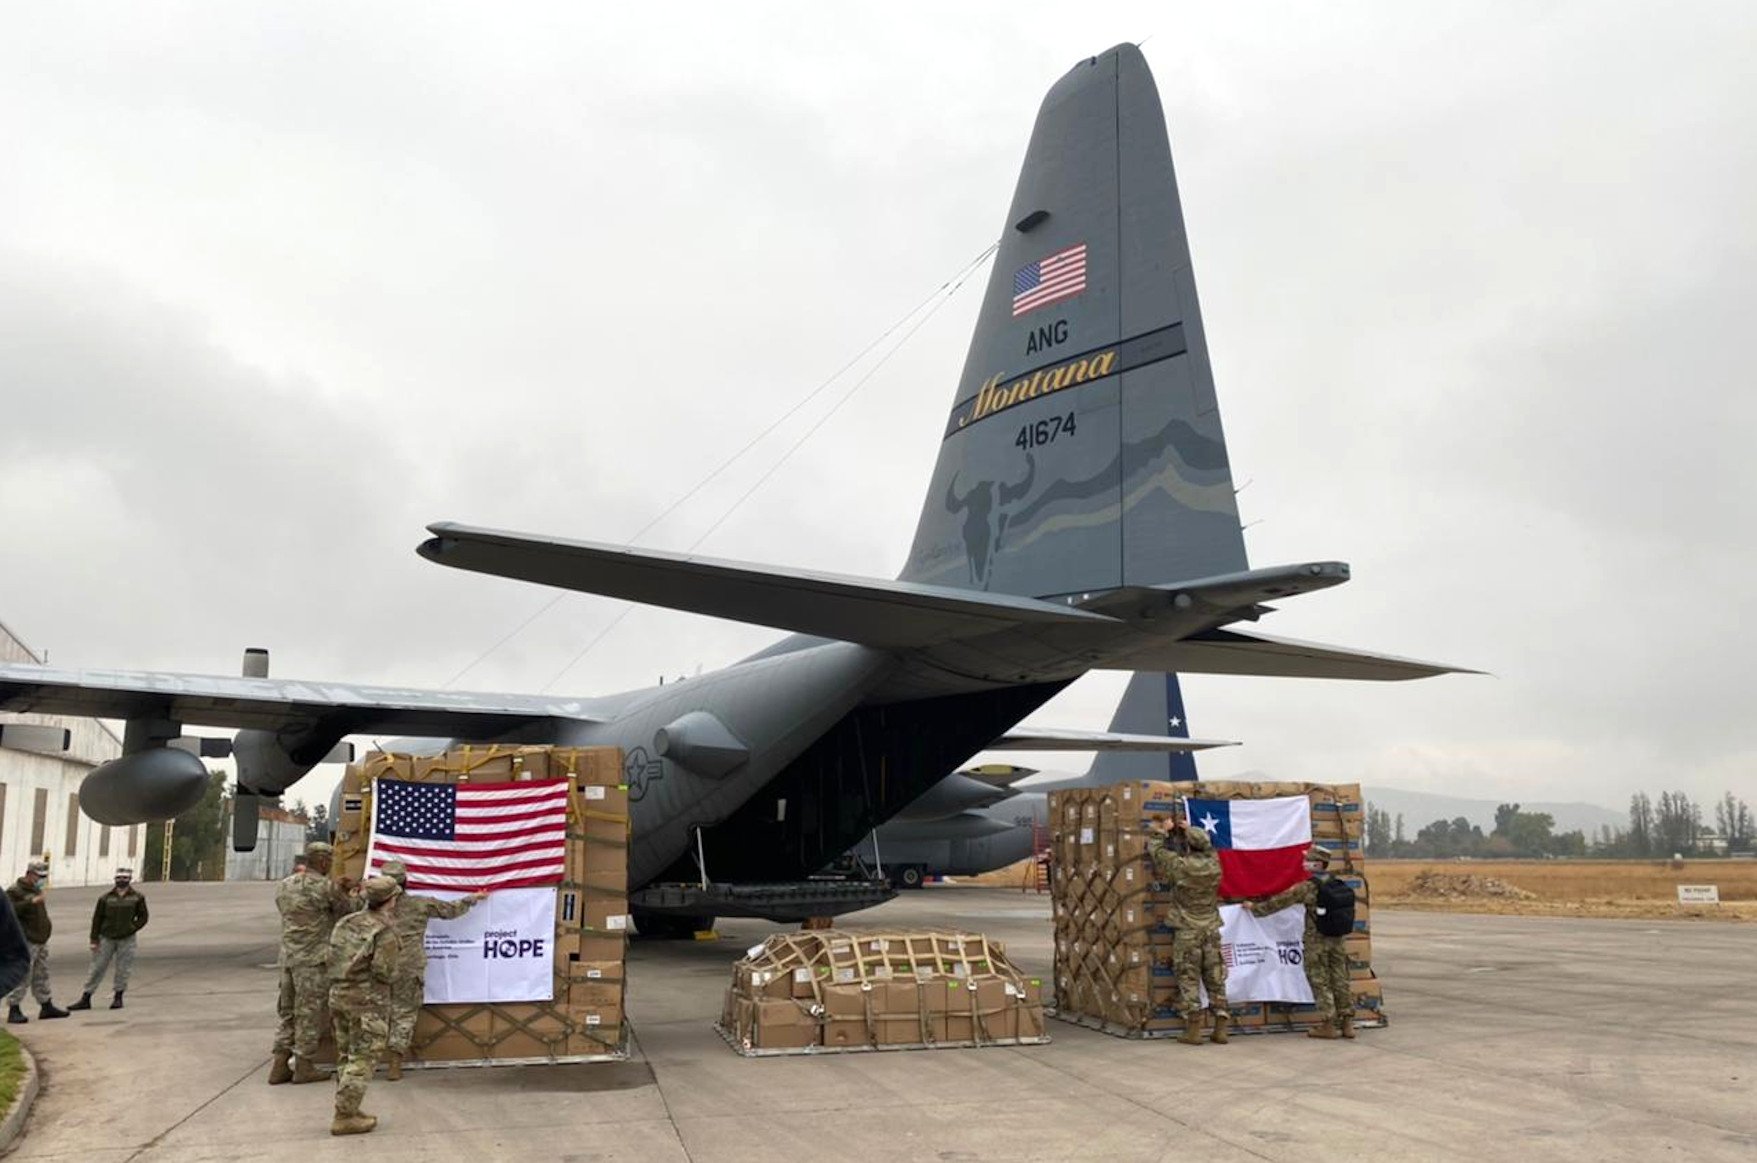 USAF%20C-130H%20donated%20to%20Chile%2022-4-21%20US%20Embassy%20in%20Chile.jpg